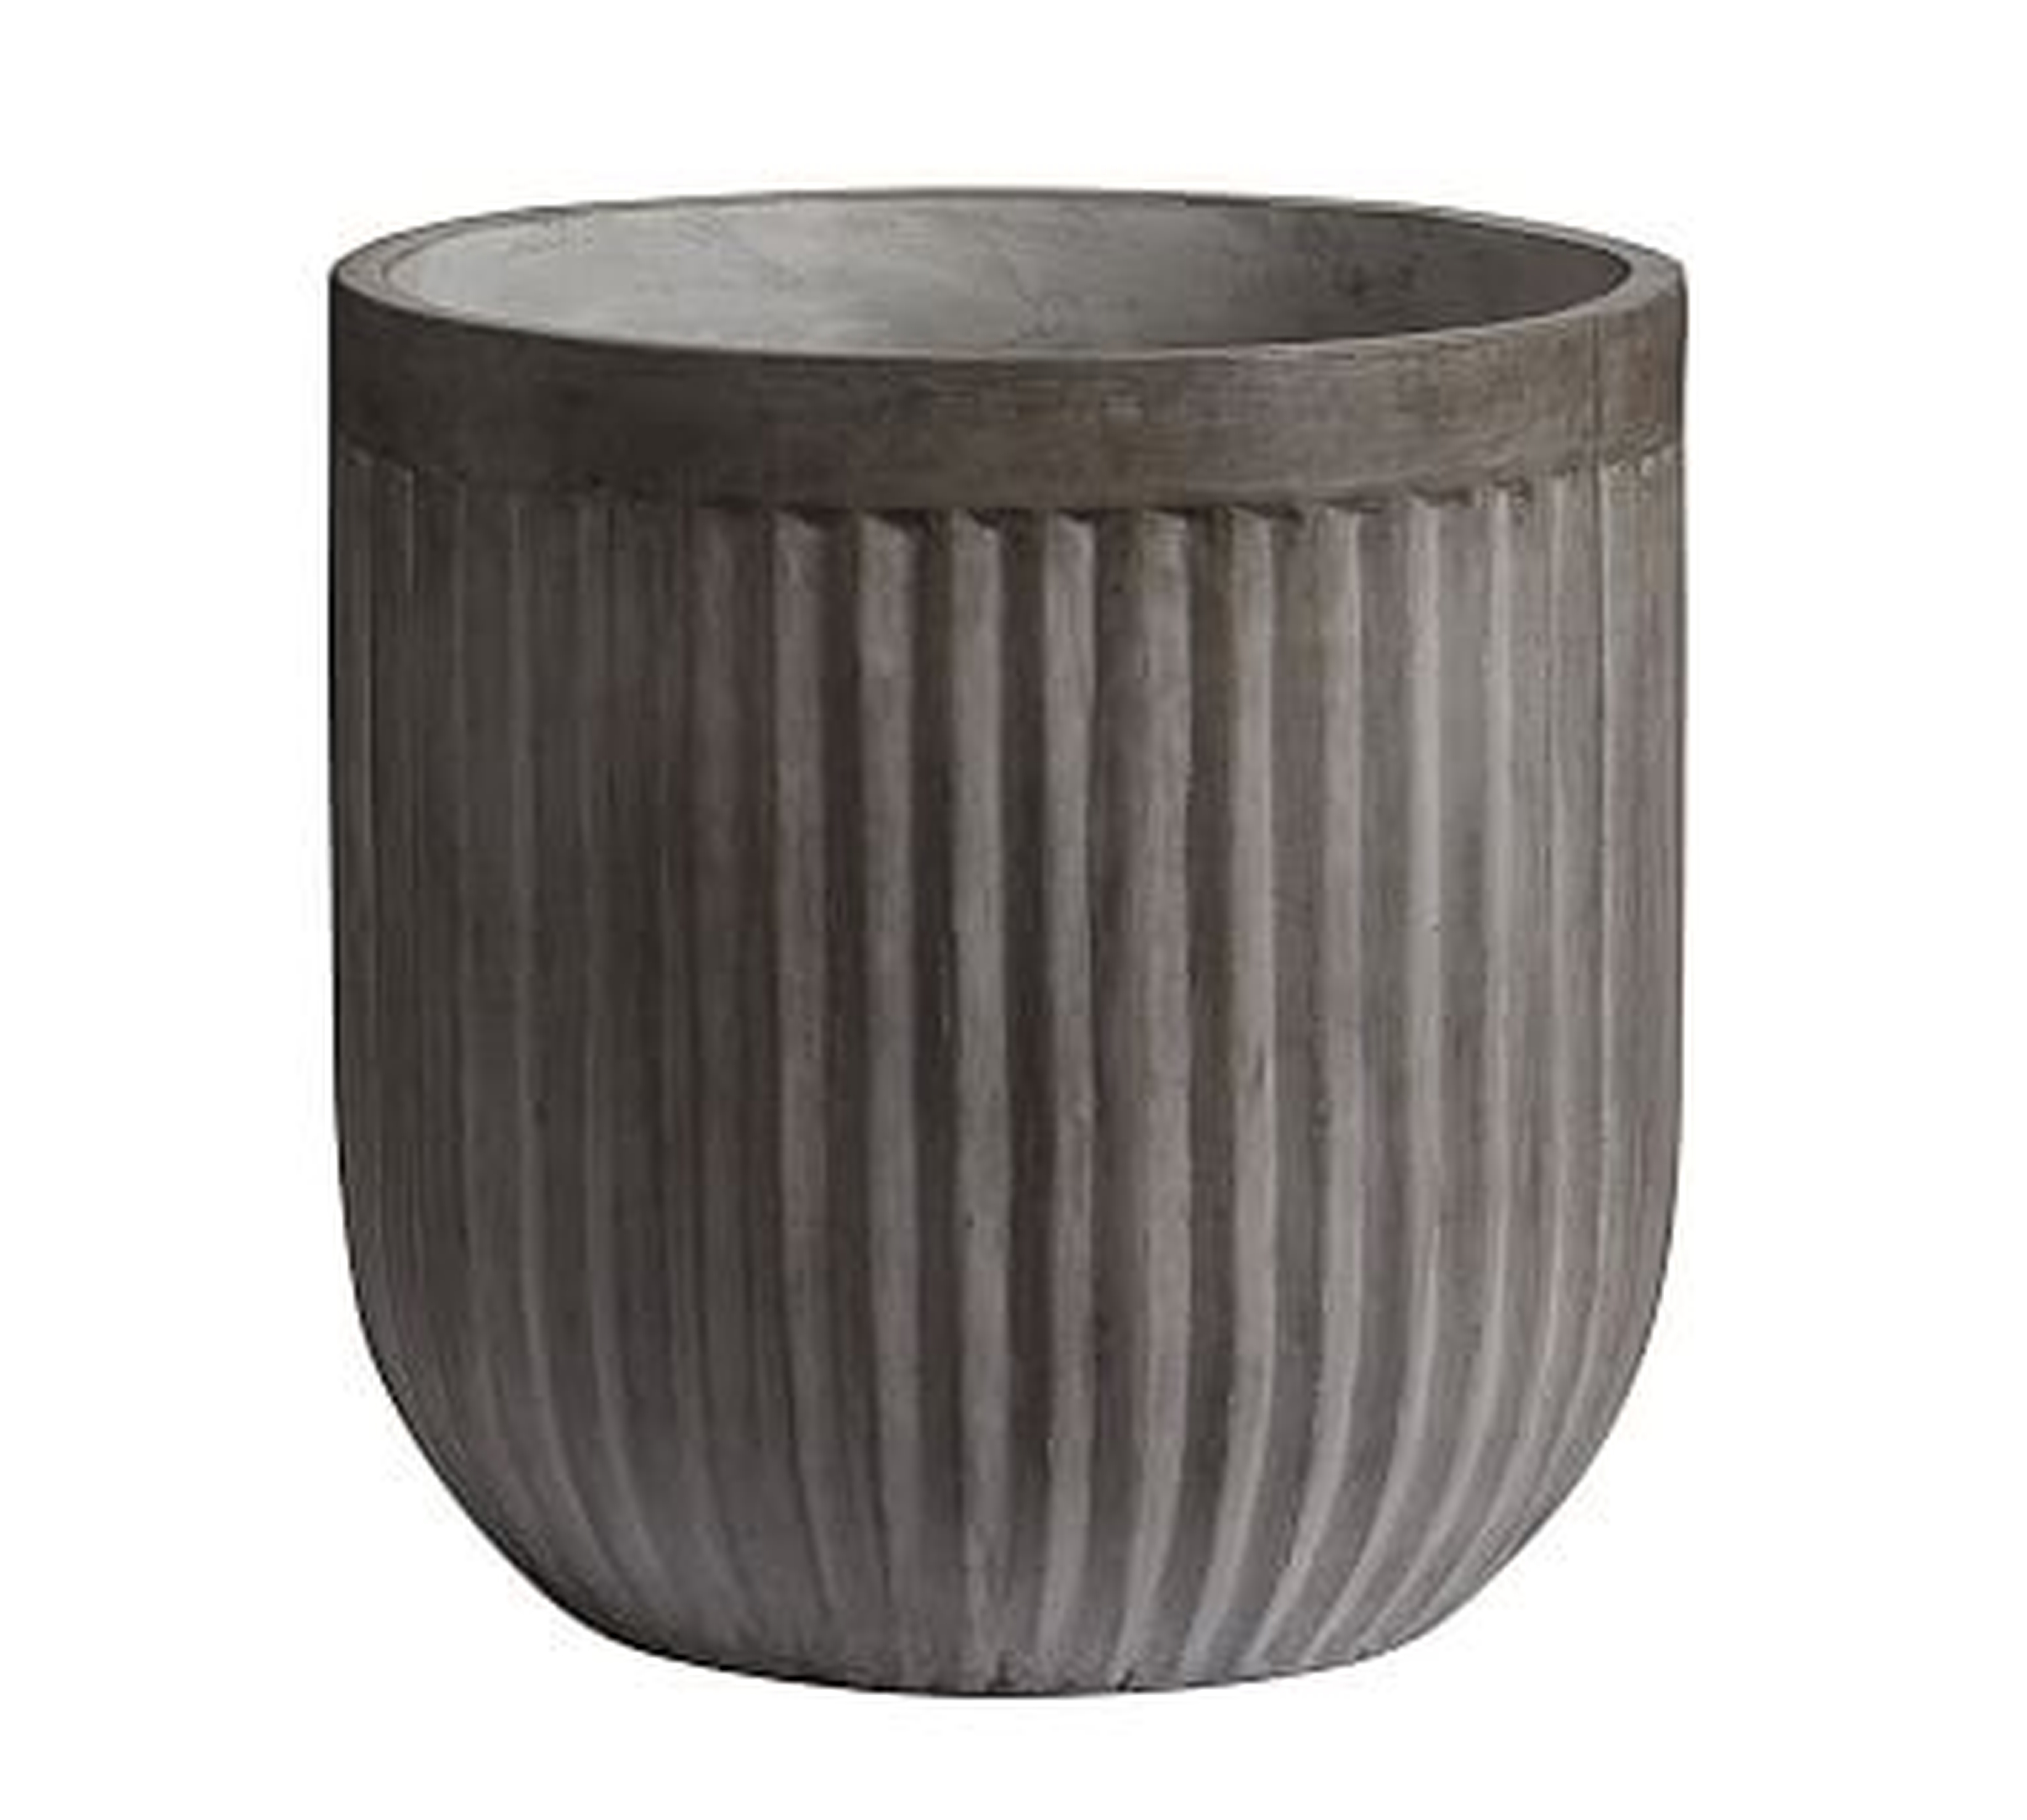 Concrete Fluted Planter, Large - Pottery Barn